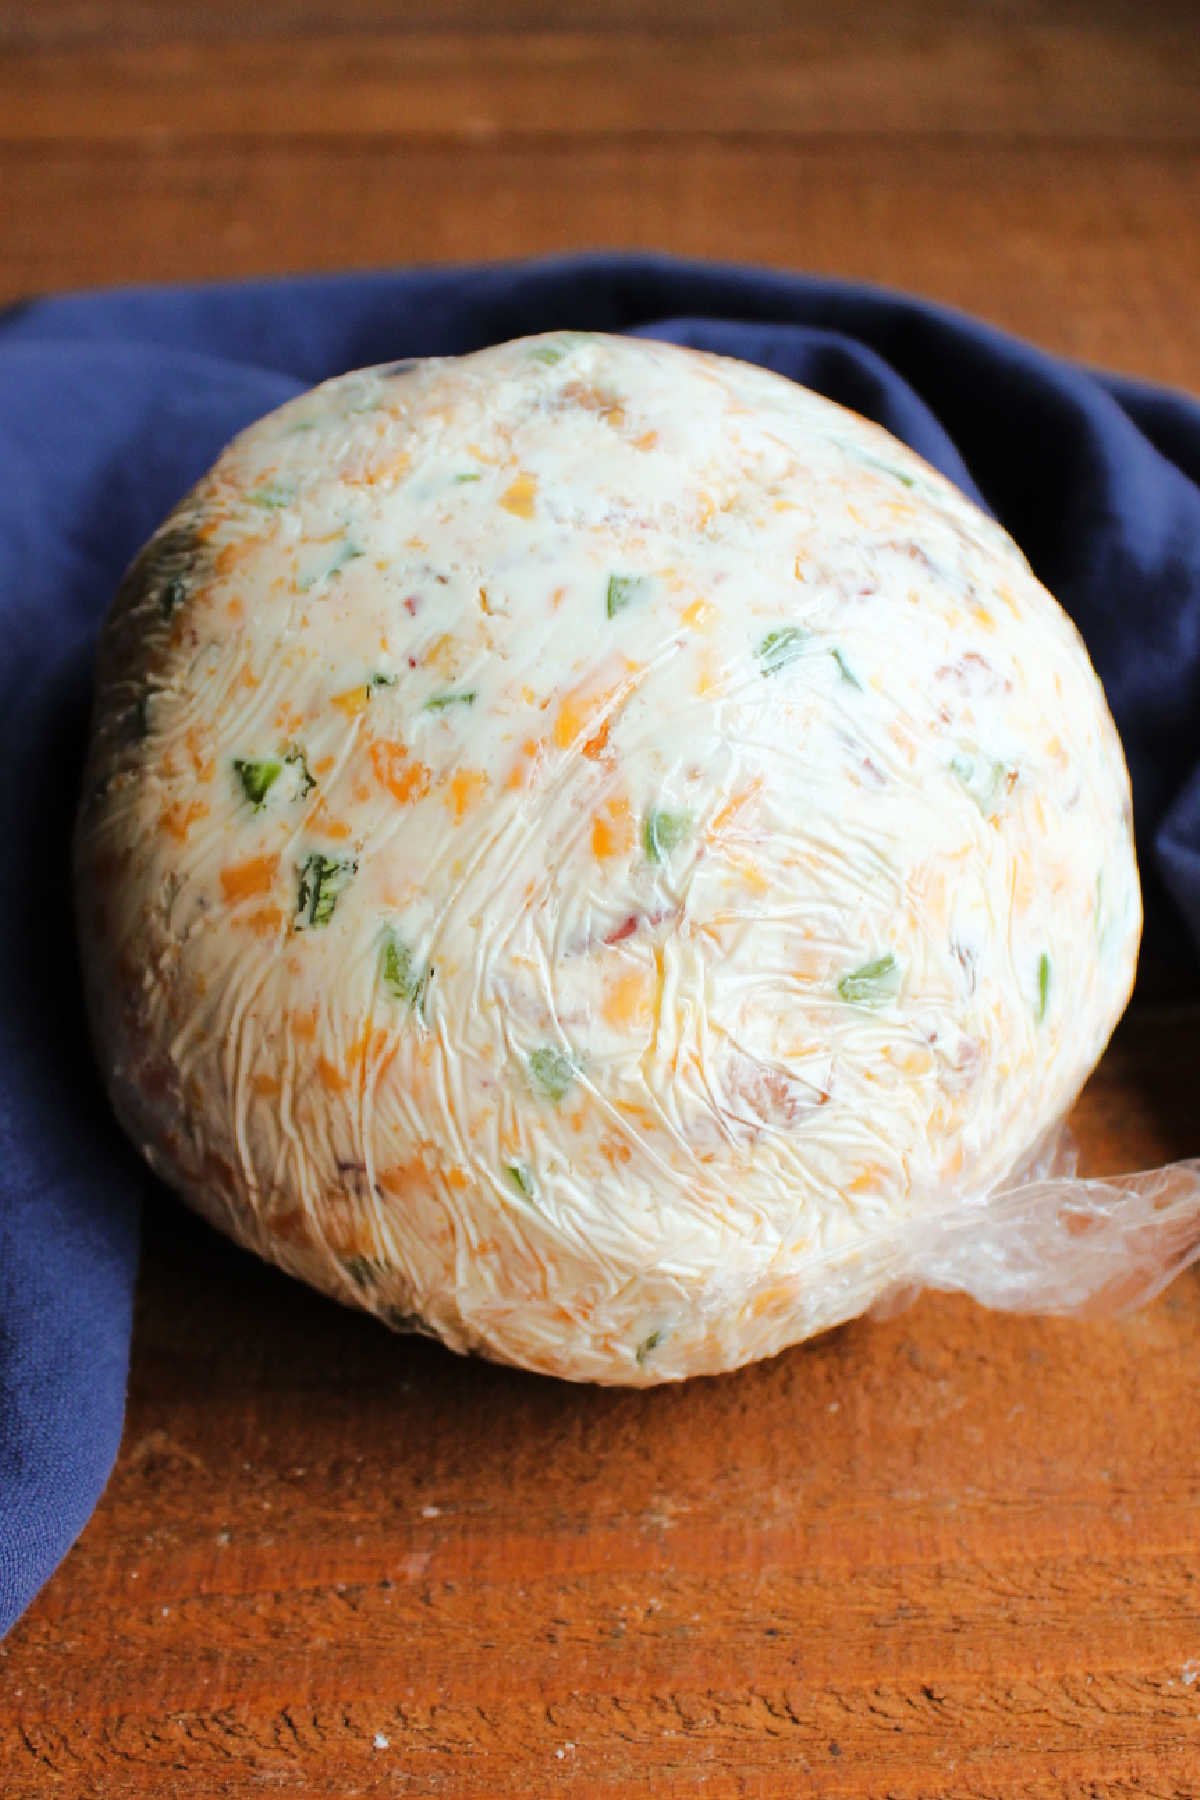 Bacon and jalapeno cheese ball wrapped in plastic wrap, ready to go in the refrigerator.